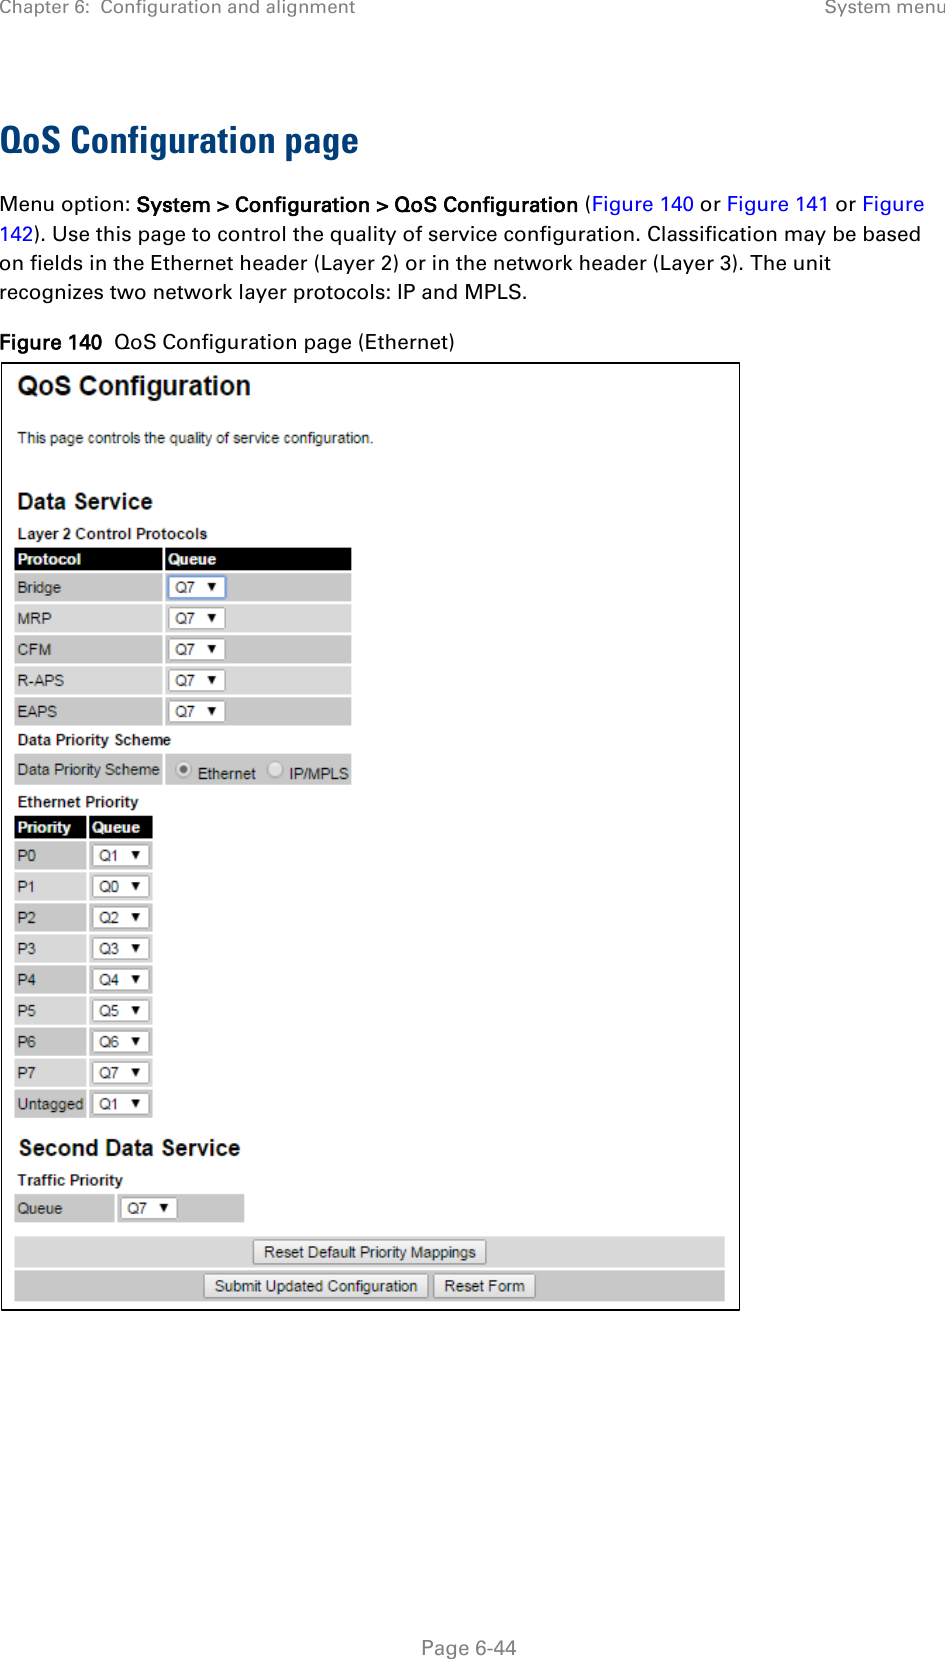 Chapter 6:  Configuration and alignment System menu  QoS Configuration page Menu option: System &gt; Configuration &gt; QoS Configuration (Figure 140 or Figure 141 or Figure 142). Use this page to control the quality of service configuration. Classification may be based on fields in the Ethernet header (Layer 2) or in the network header (Layer 3). The unit recognizes two network layer protocols: IP and MPLS.  Figure 140  QoS Configuration page (Ethernet)   Page 6-44 